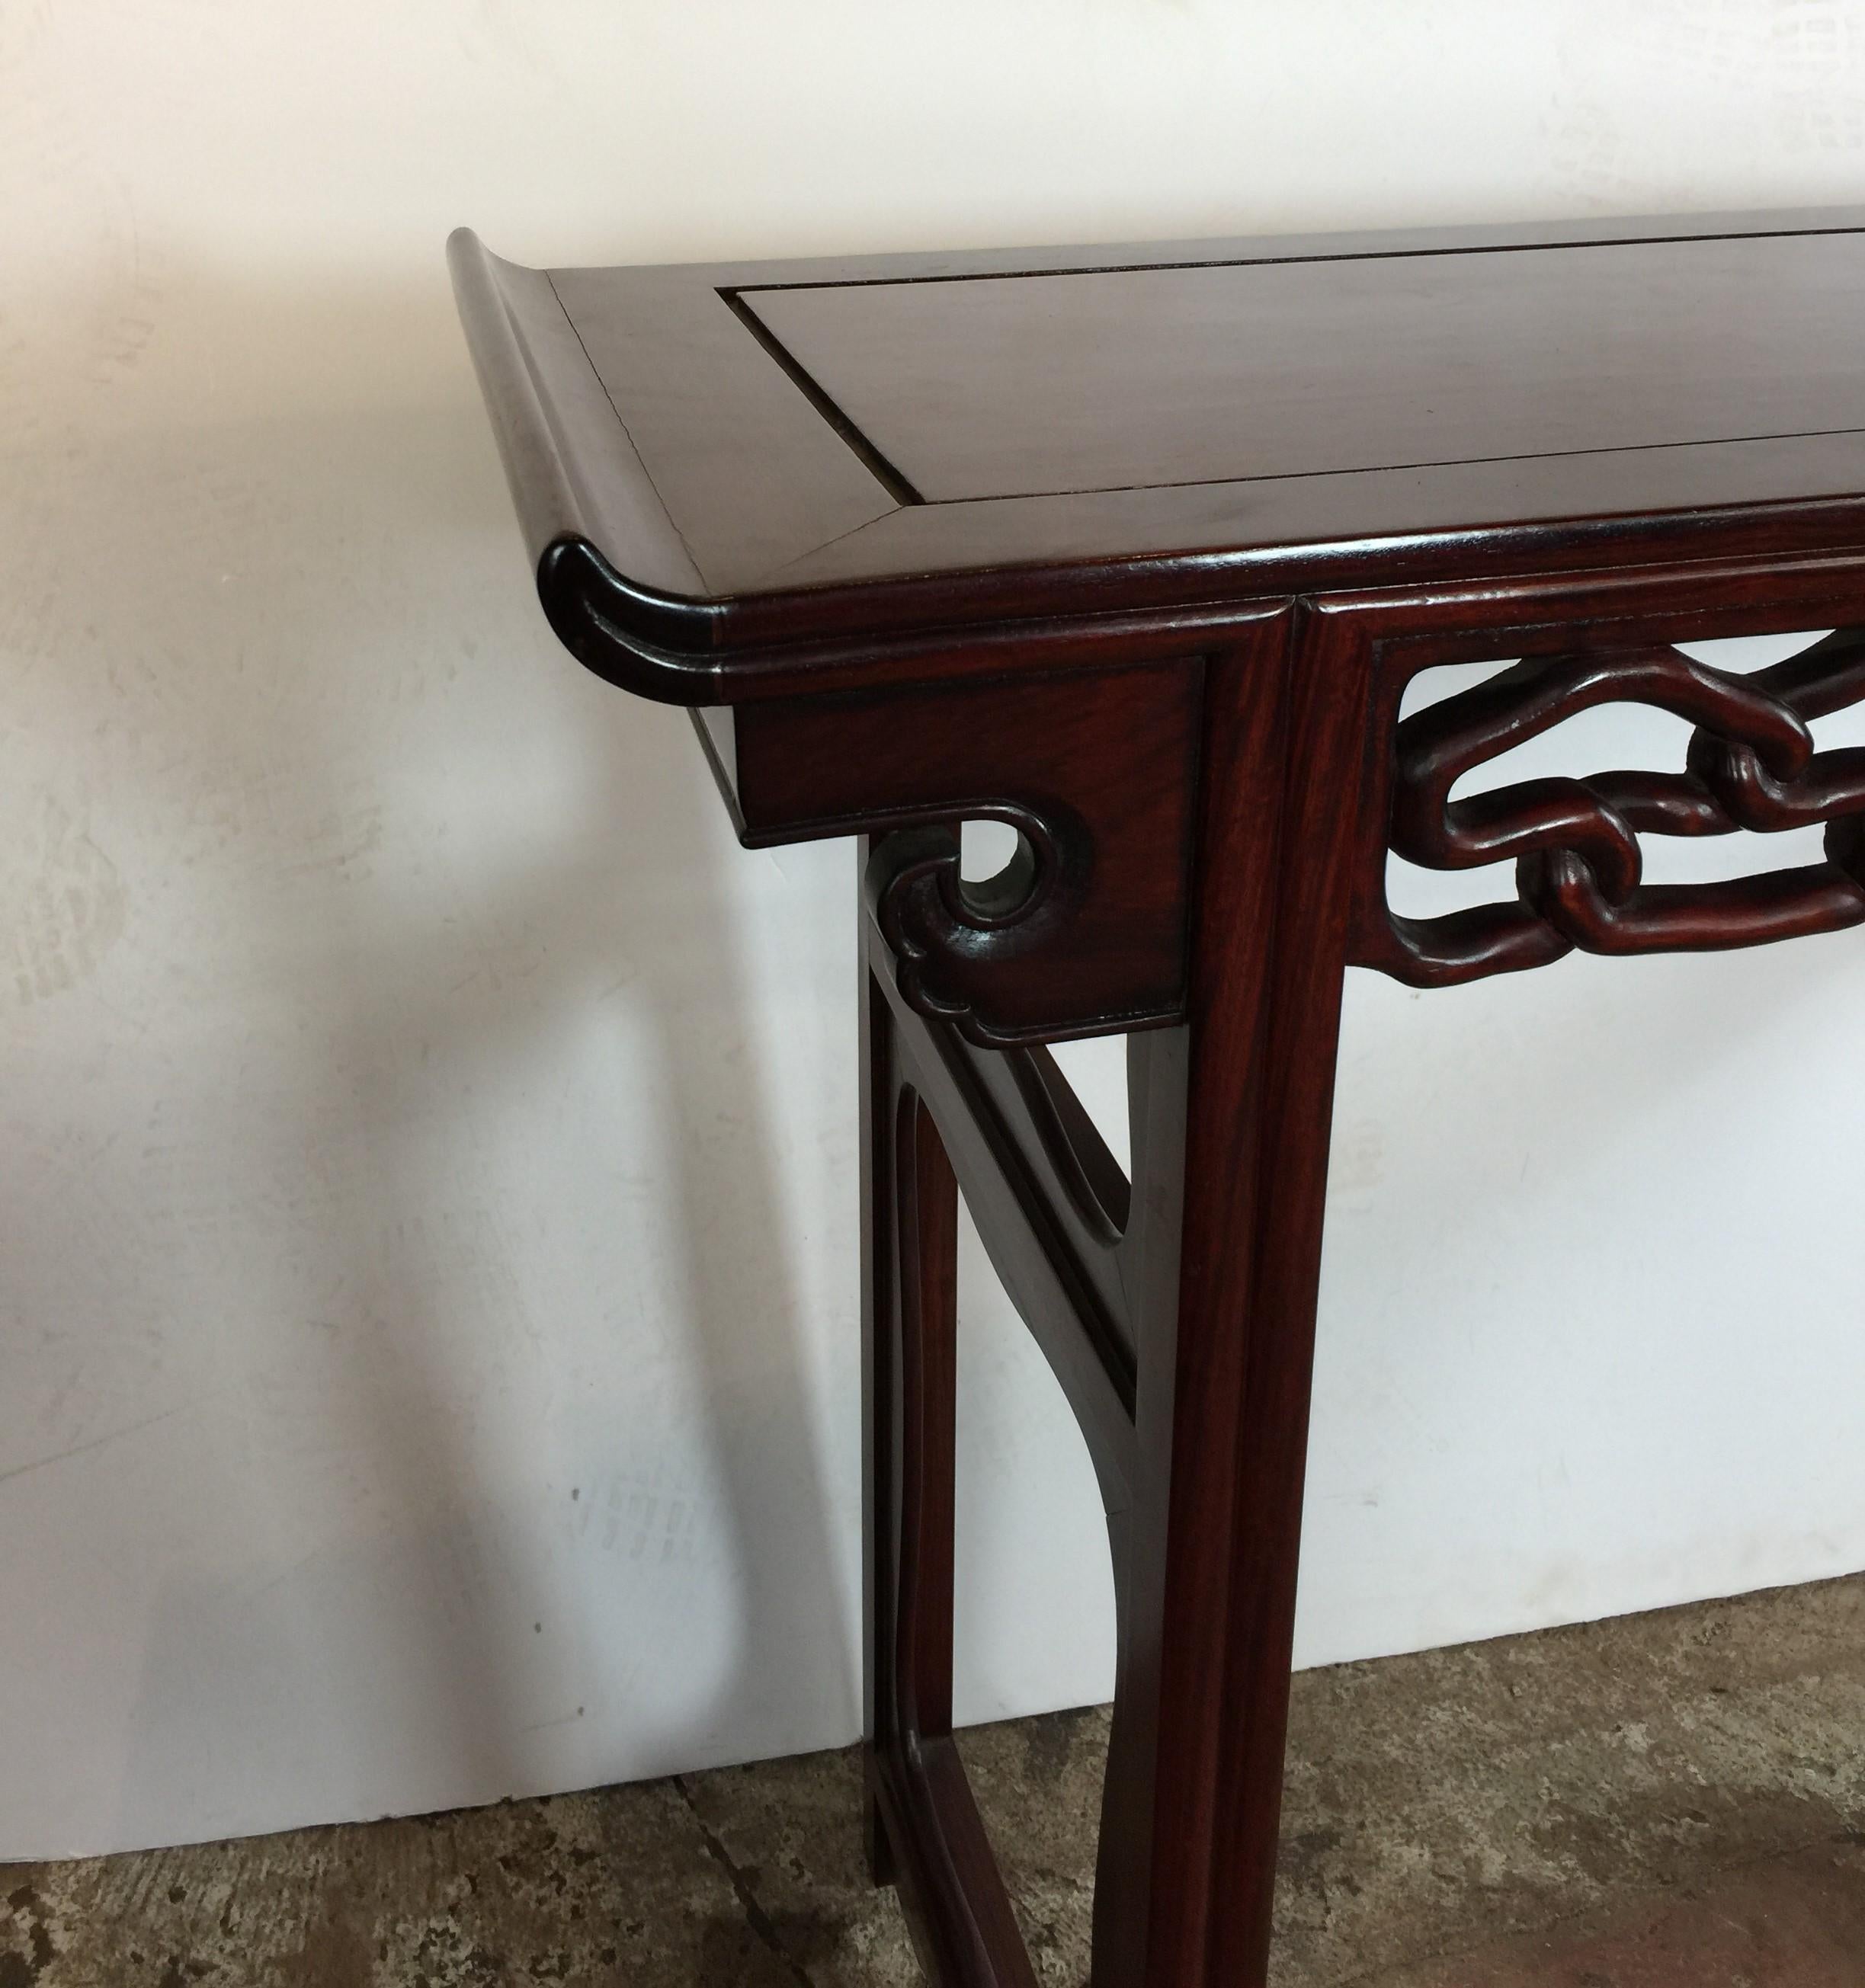 Chinese late Qing style alter table. Classic wood carved design.